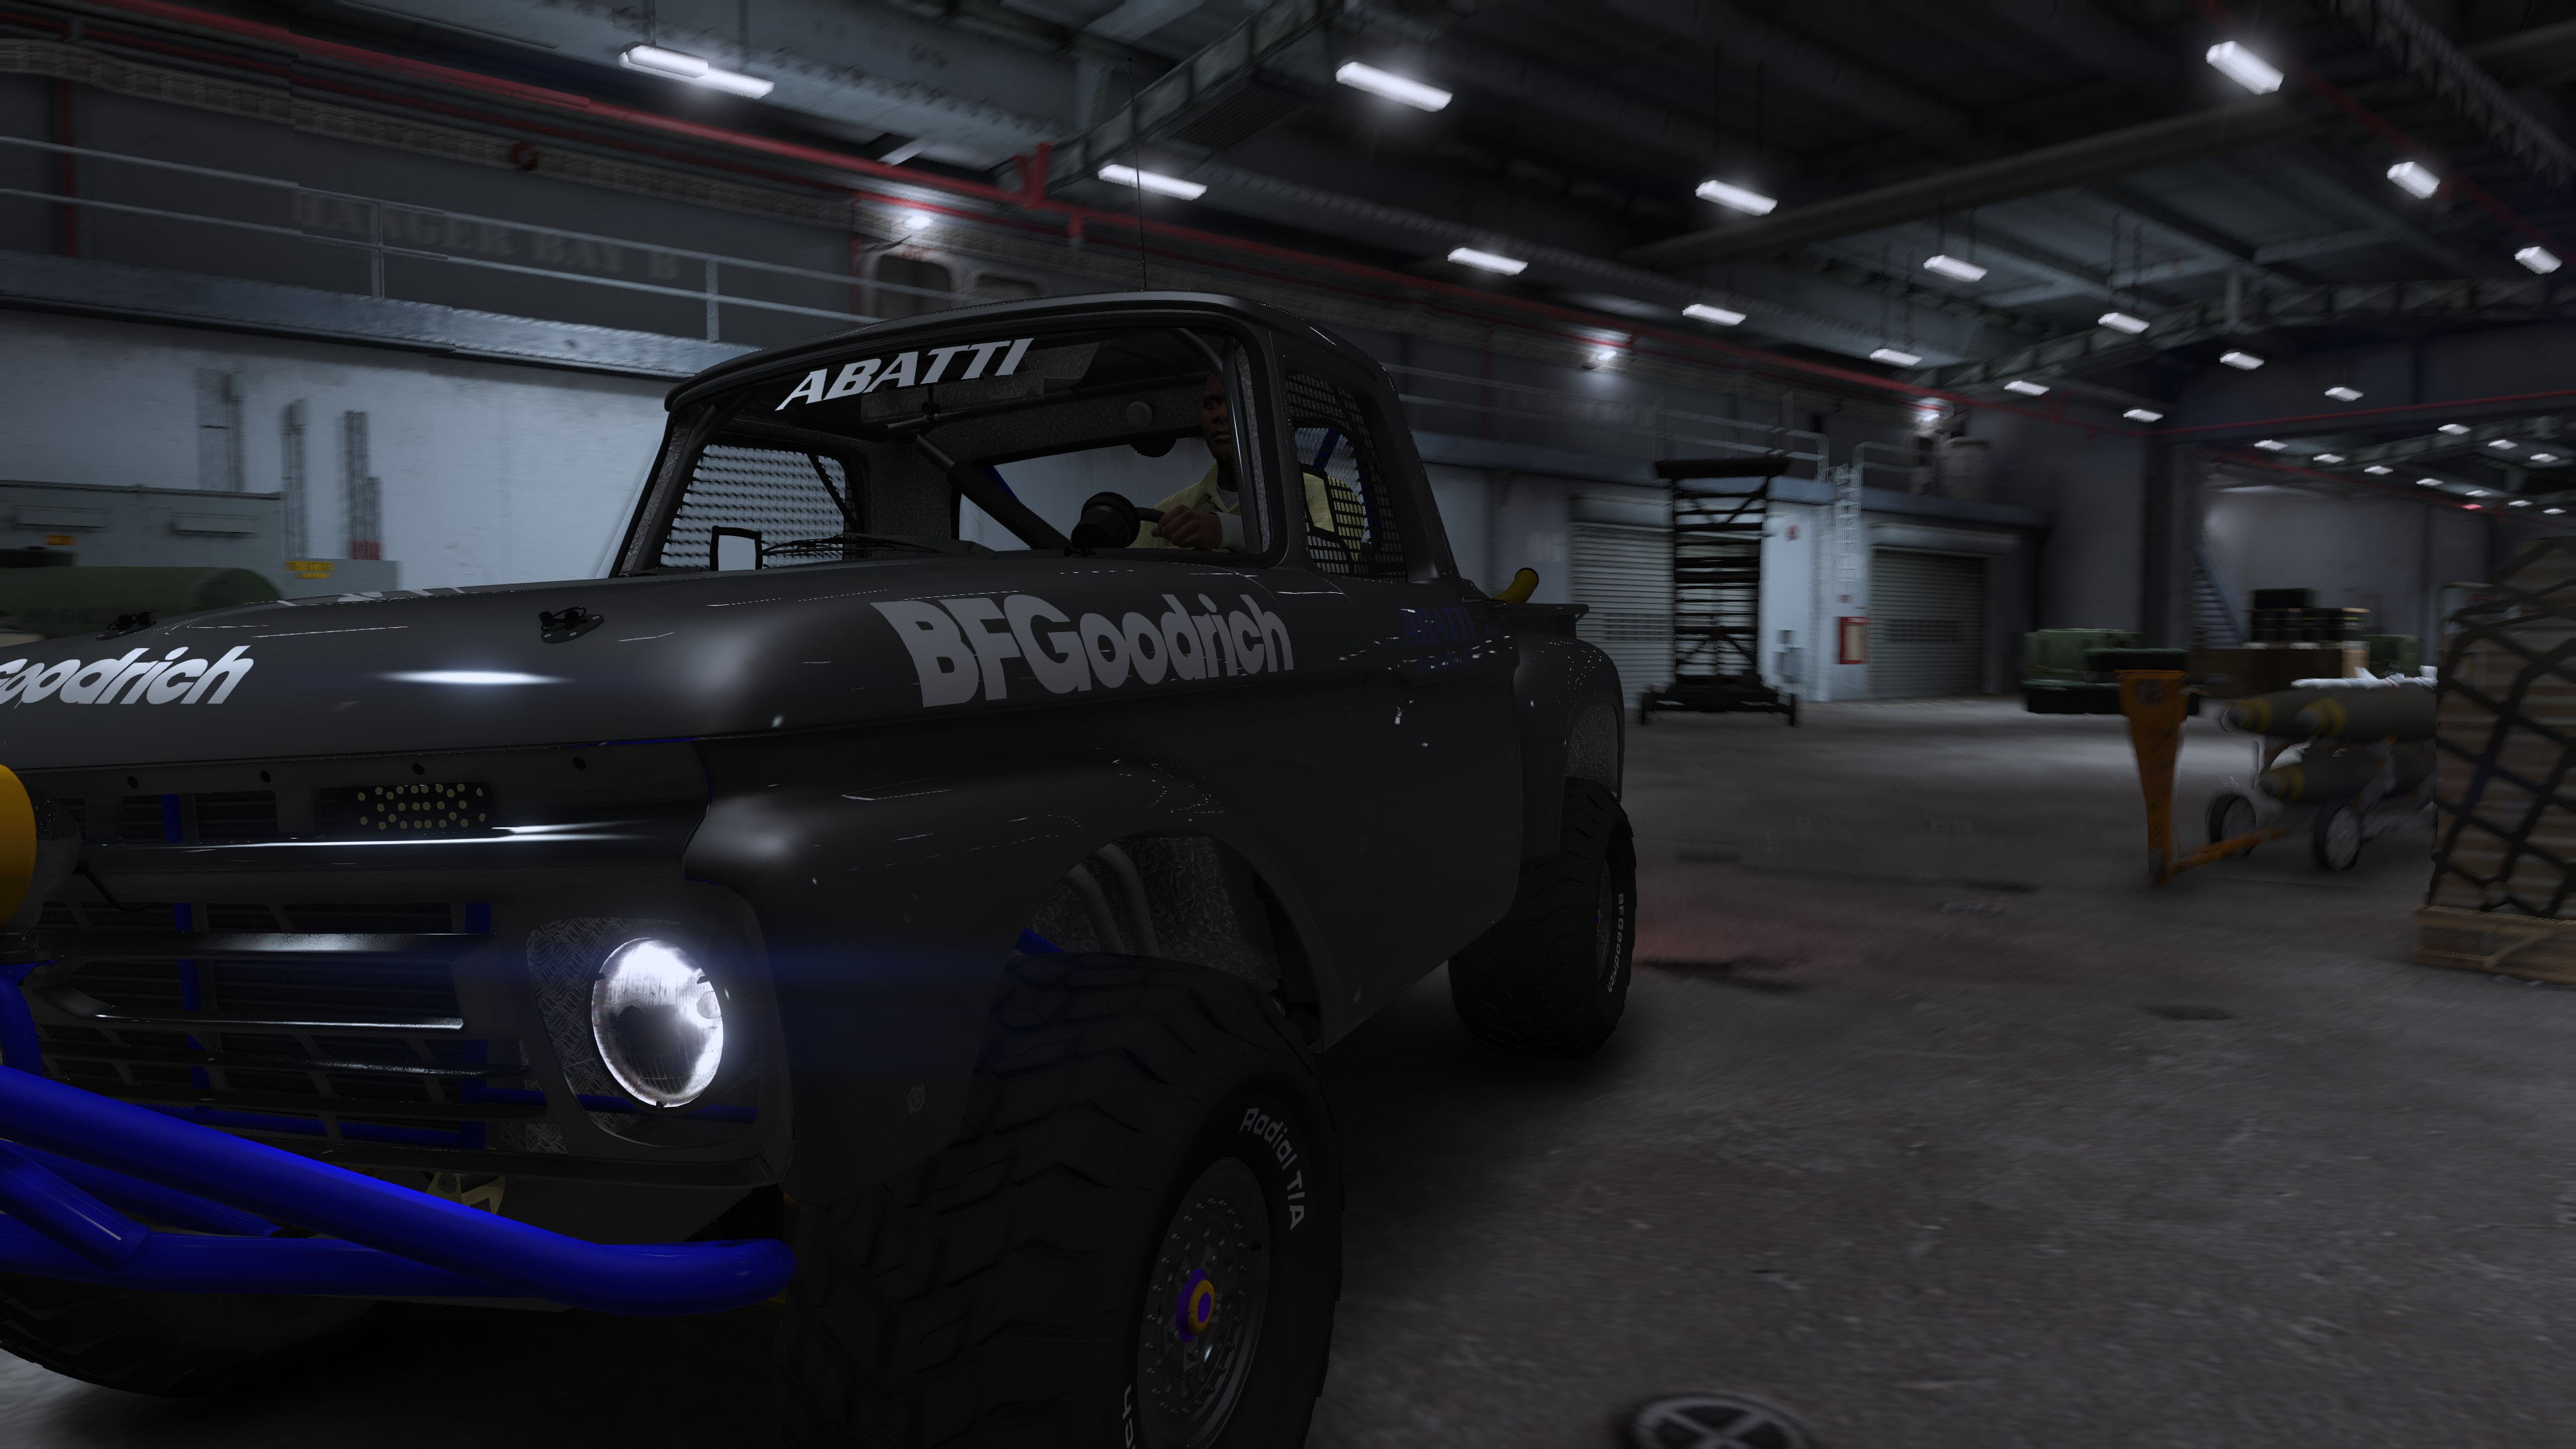 Ford F 100 Flareside Abatti Racing Trophy Truck Add On Livery